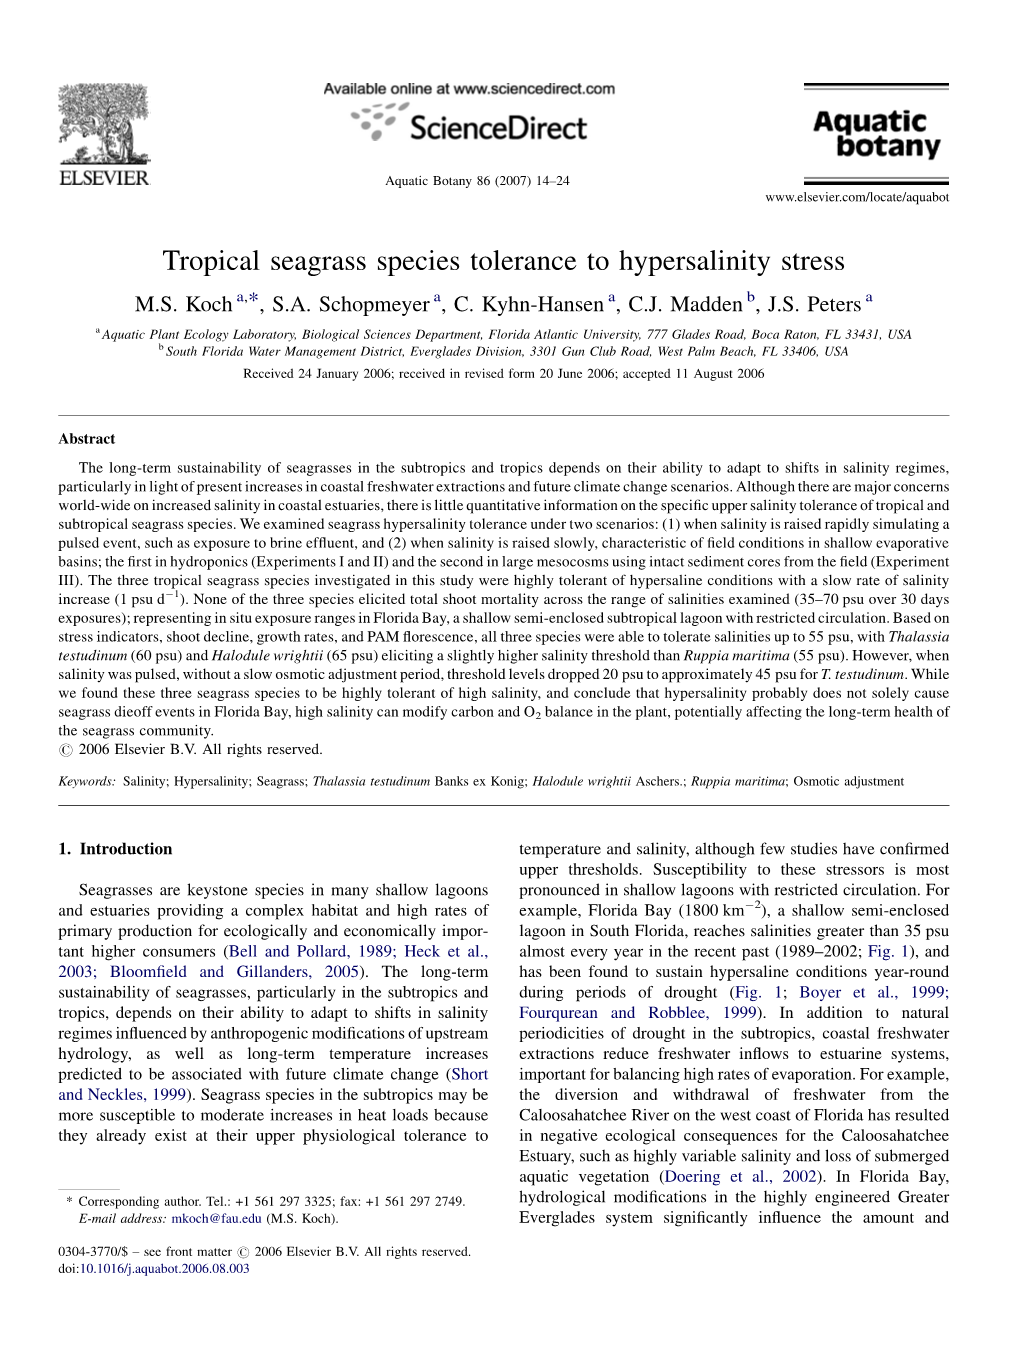 Tropical Seagrass Species Tolerance to Hypersalinity Stress M.S